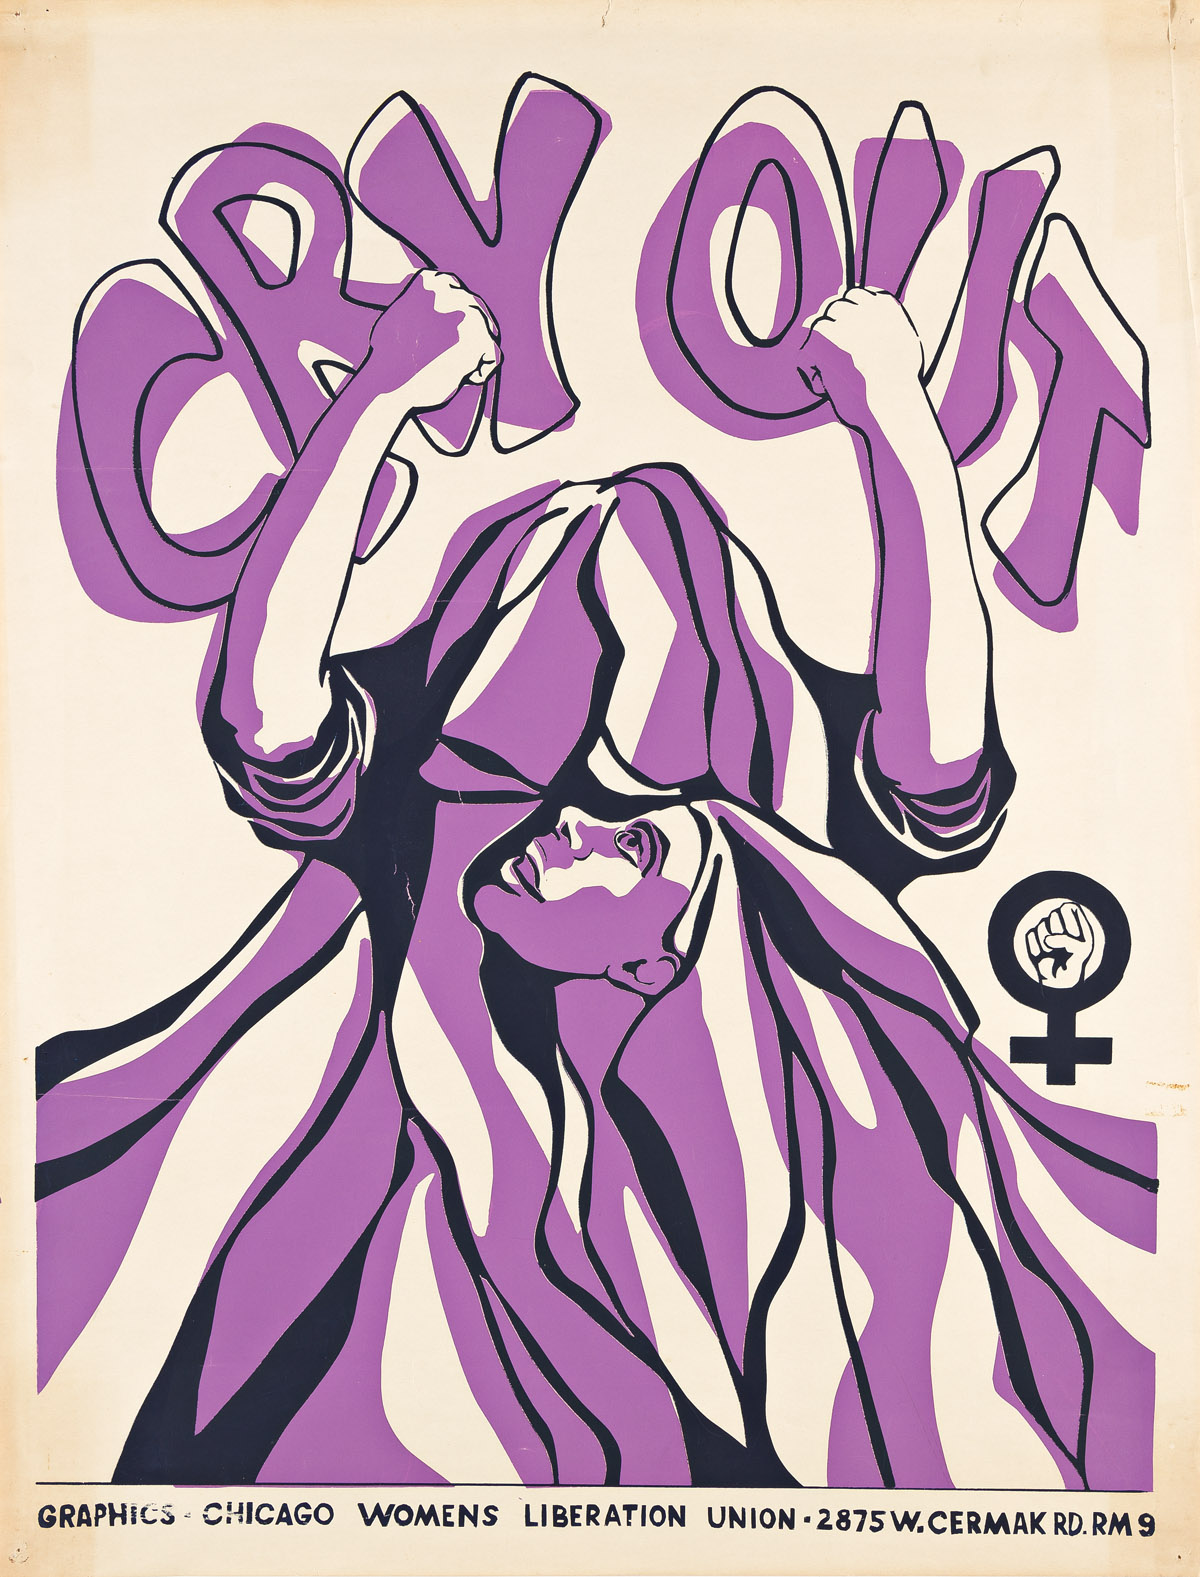 Chicago Womens Graphics Collective. Cry Out.